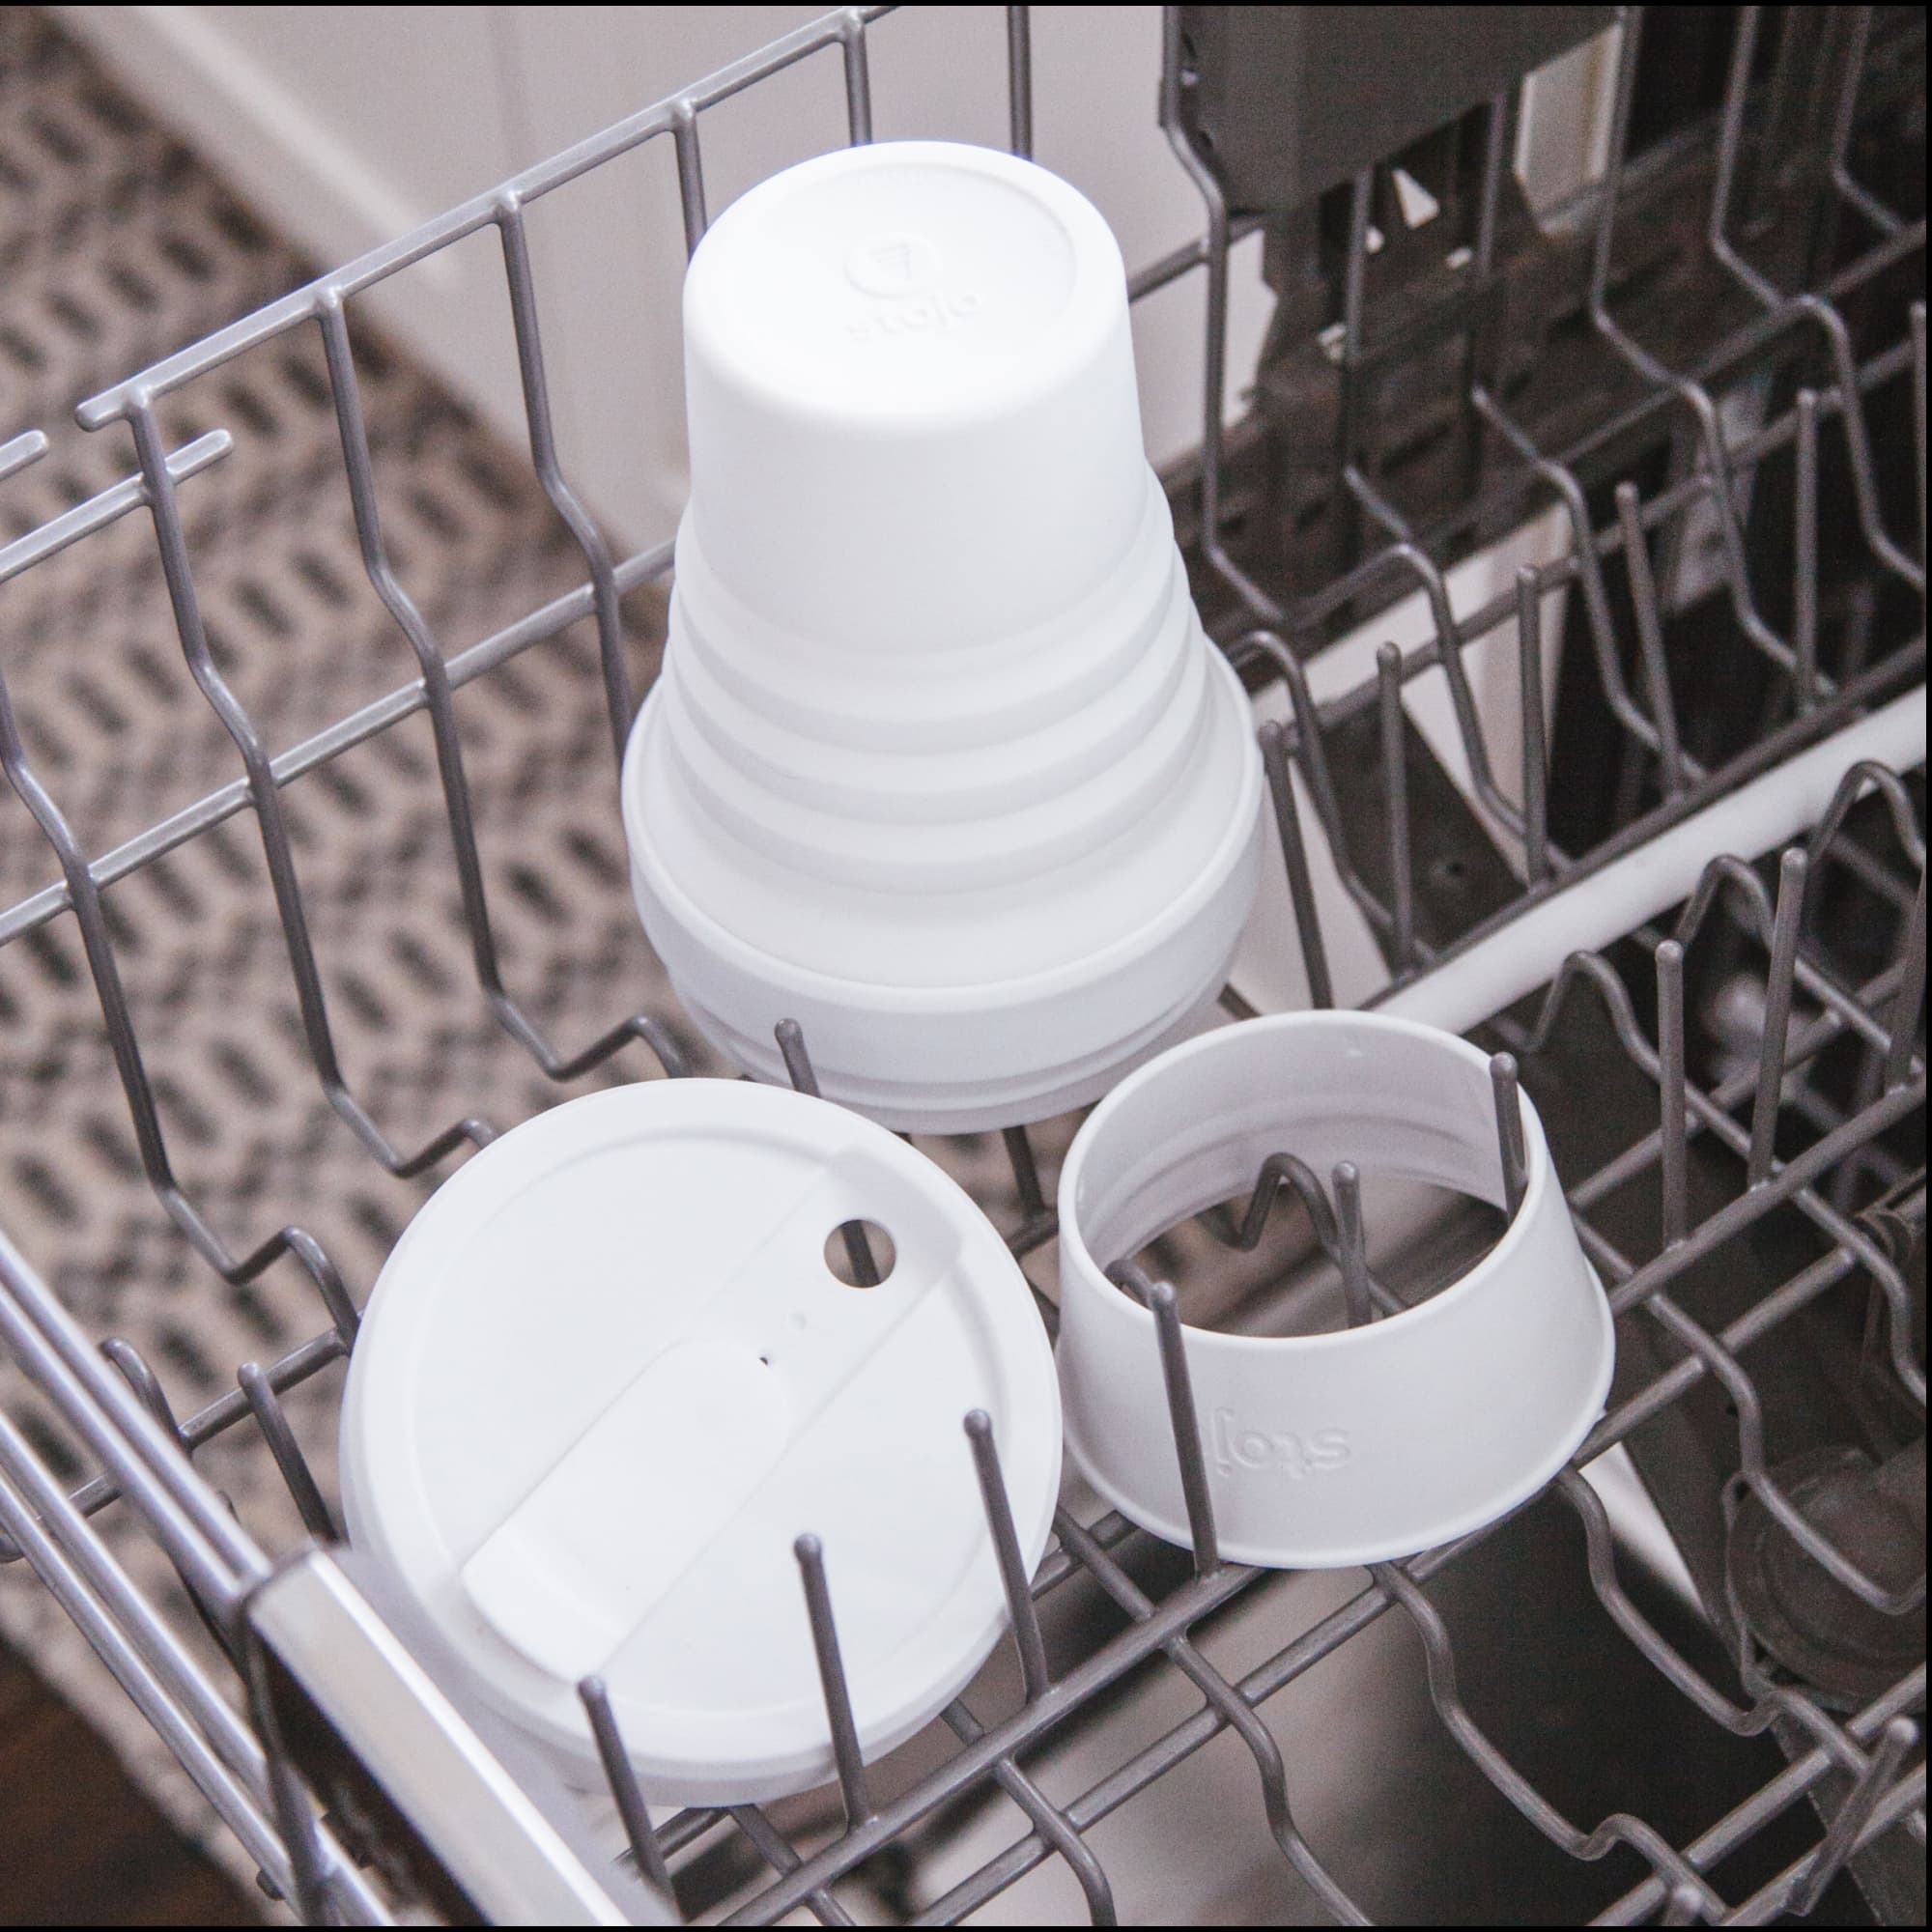 Dishwasher safe. You’re welcome.